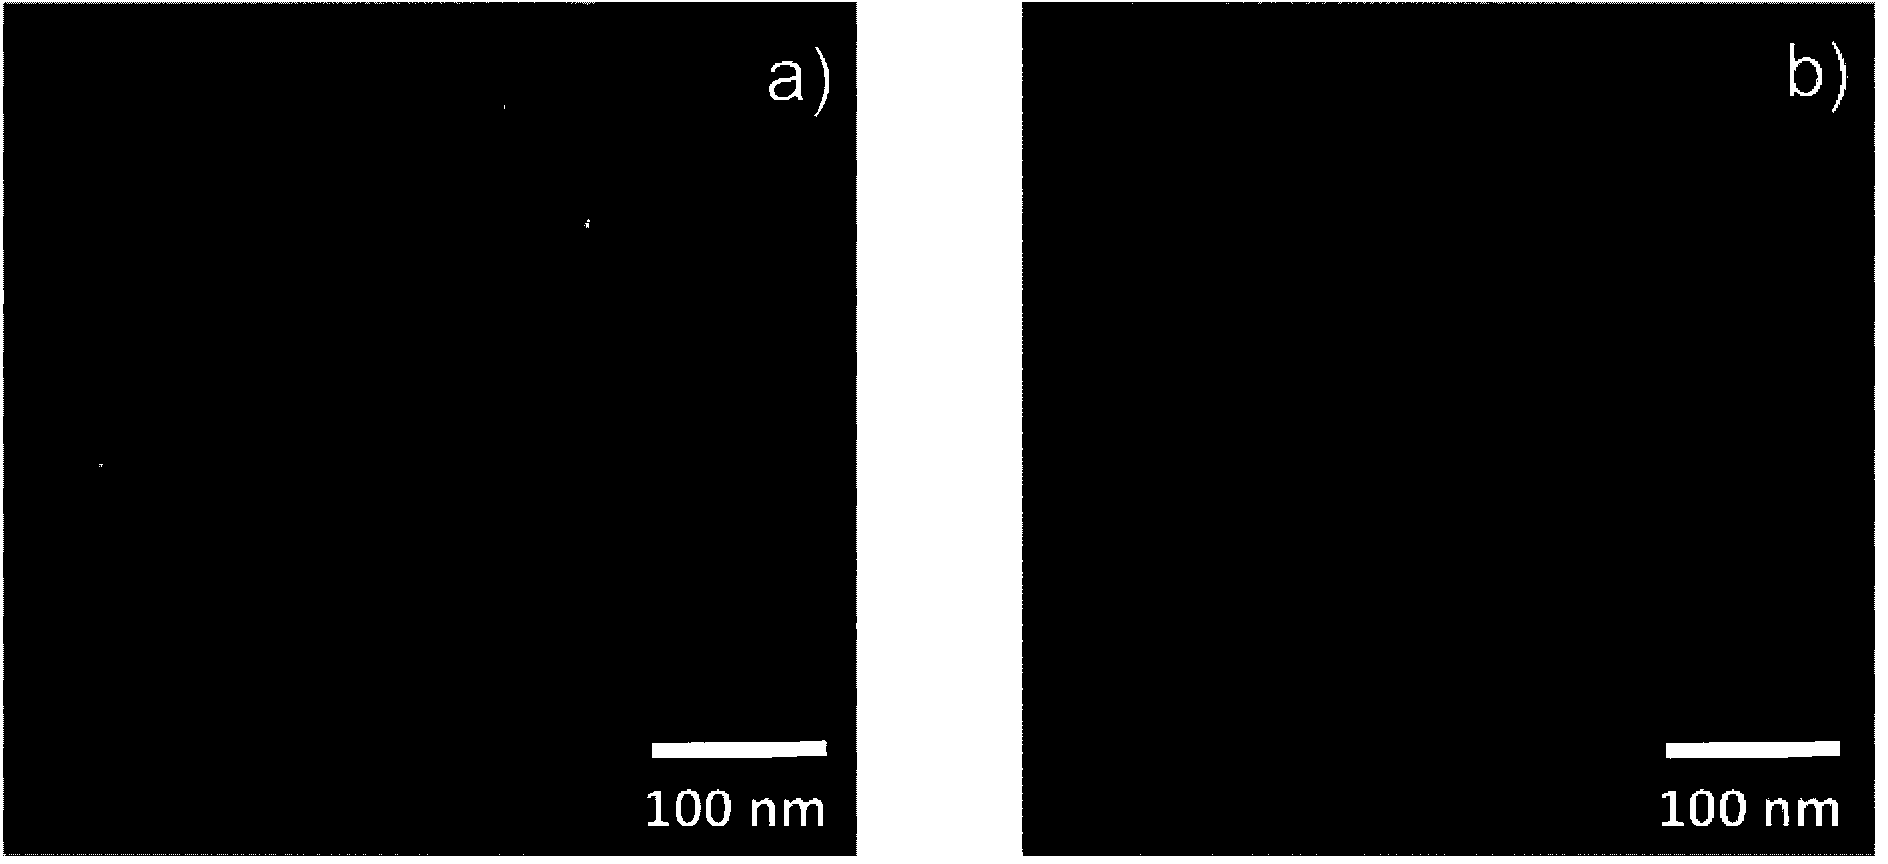 Substrate surface structured with thermally stable metal alloy nanoparticles, method for preparing the same and uses thereof, in particular as catalyst